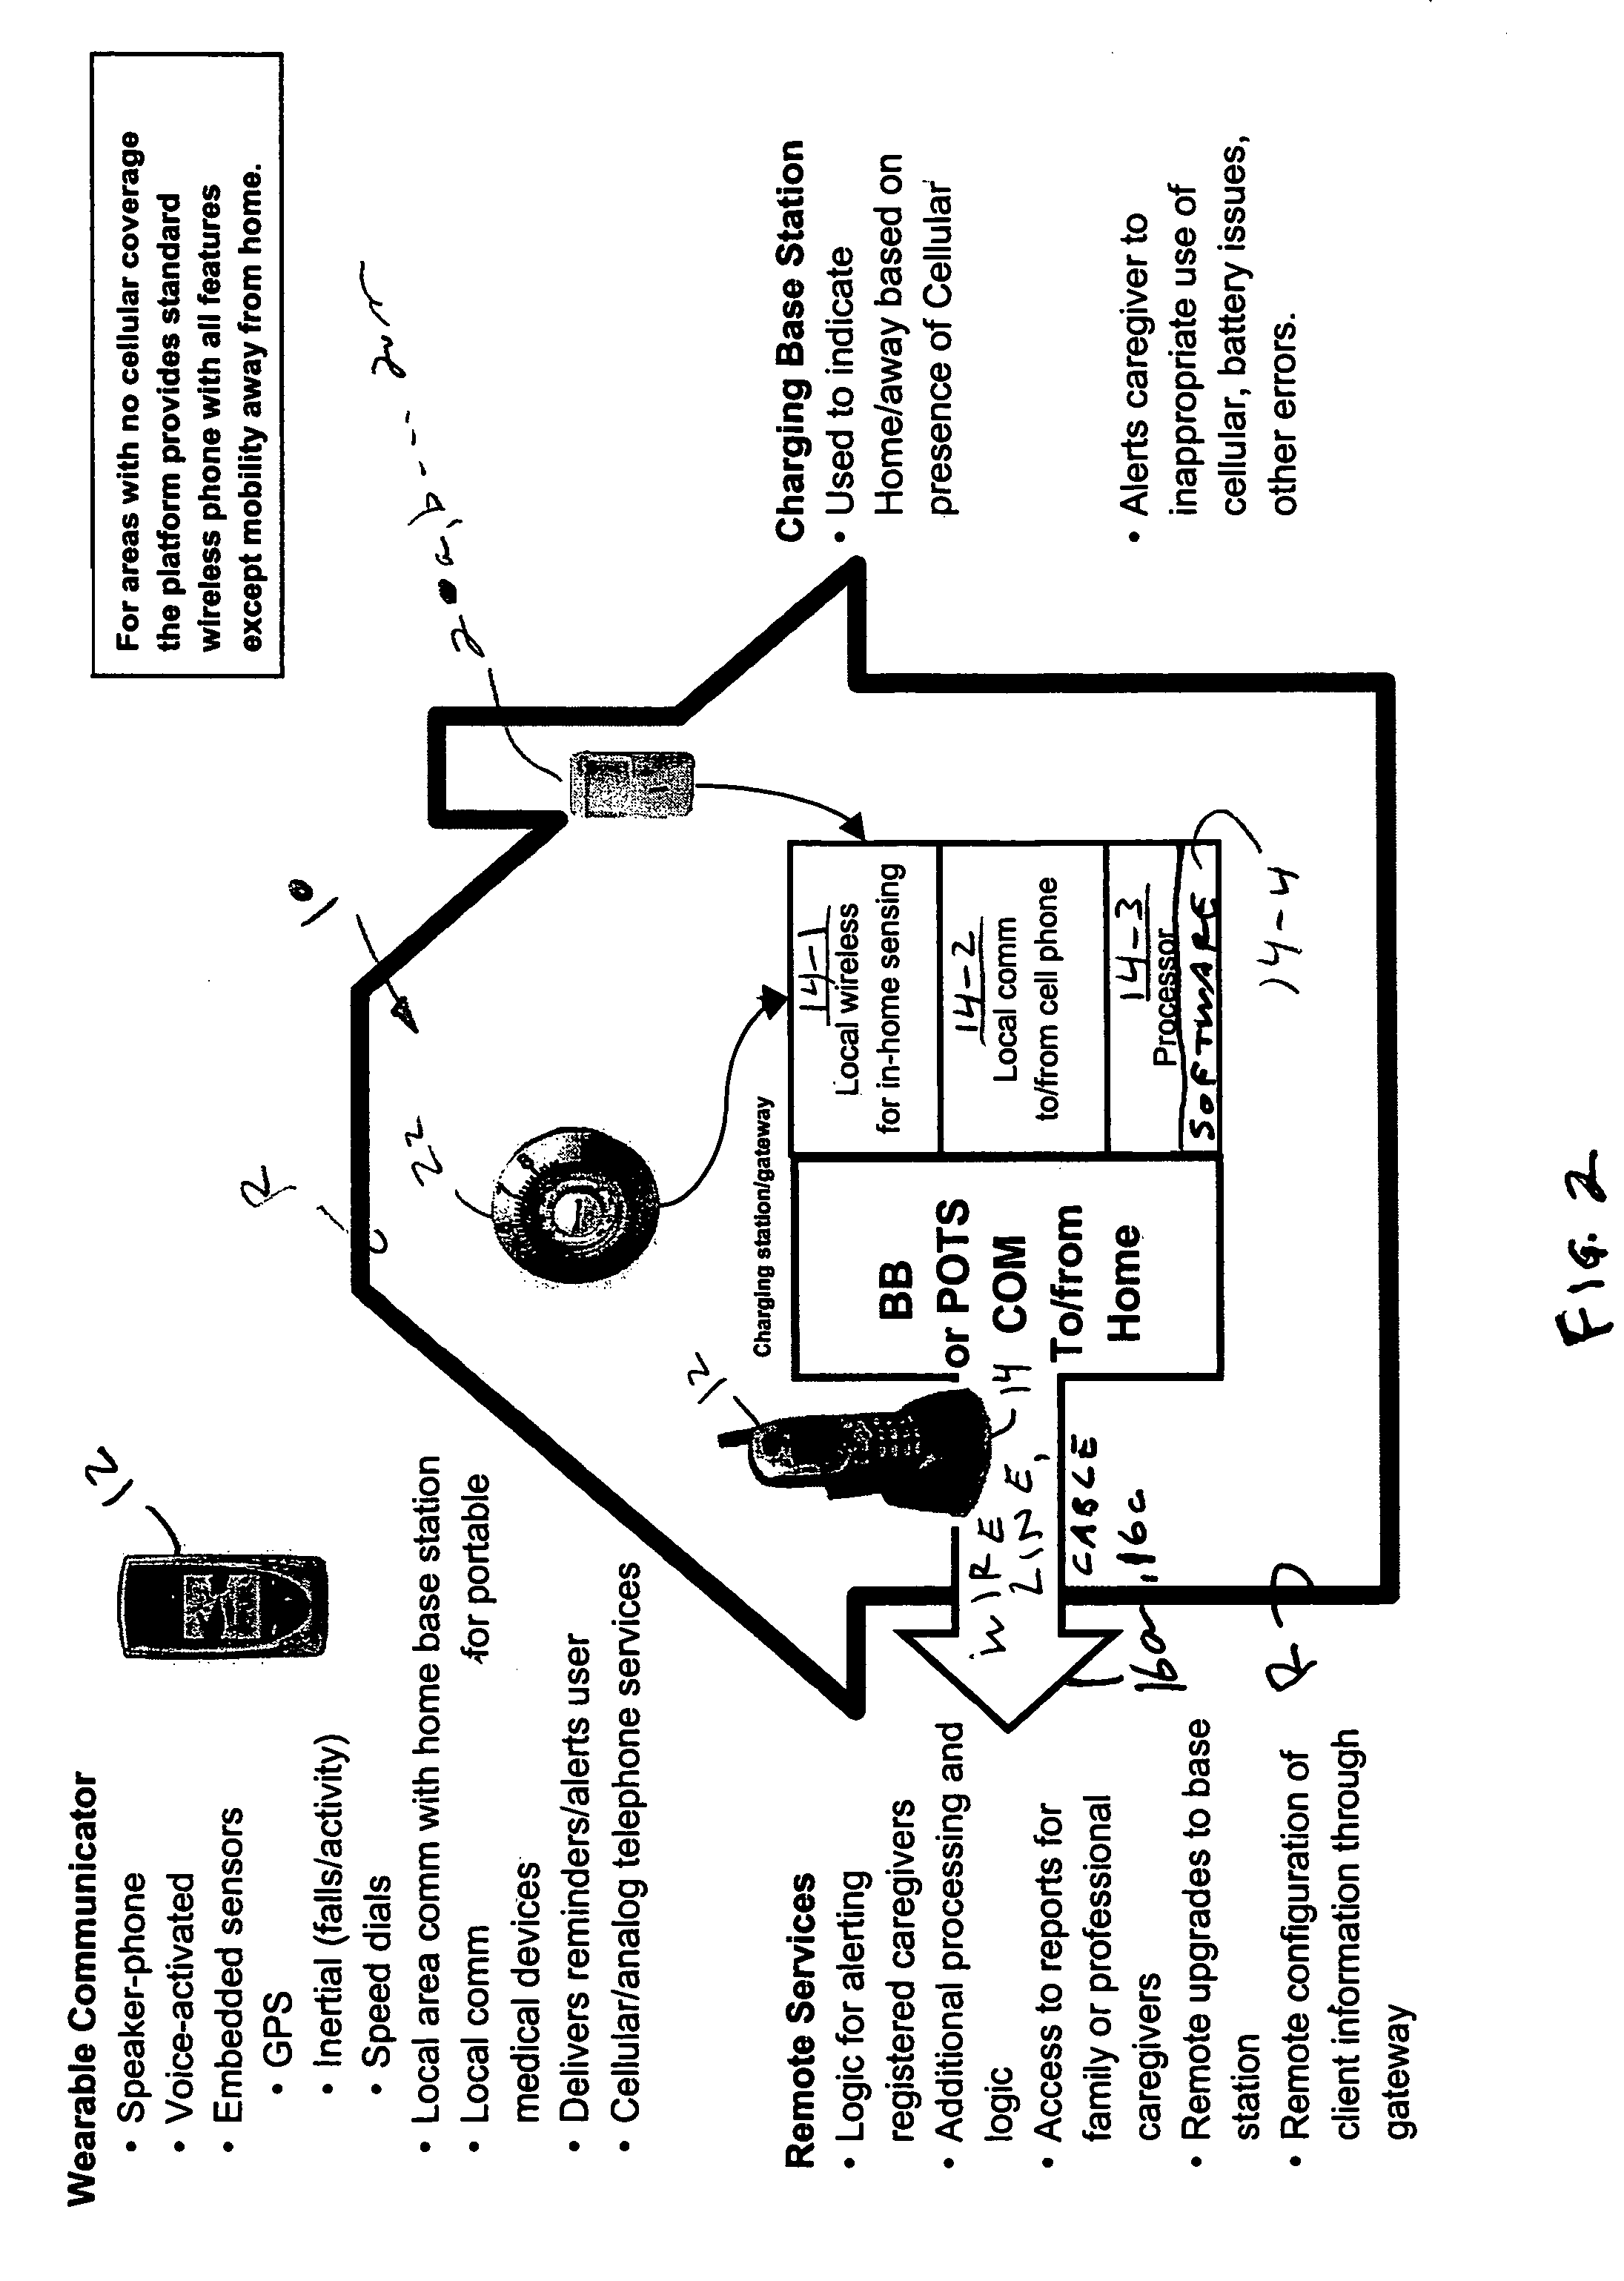 Mobile telephonic device and base station